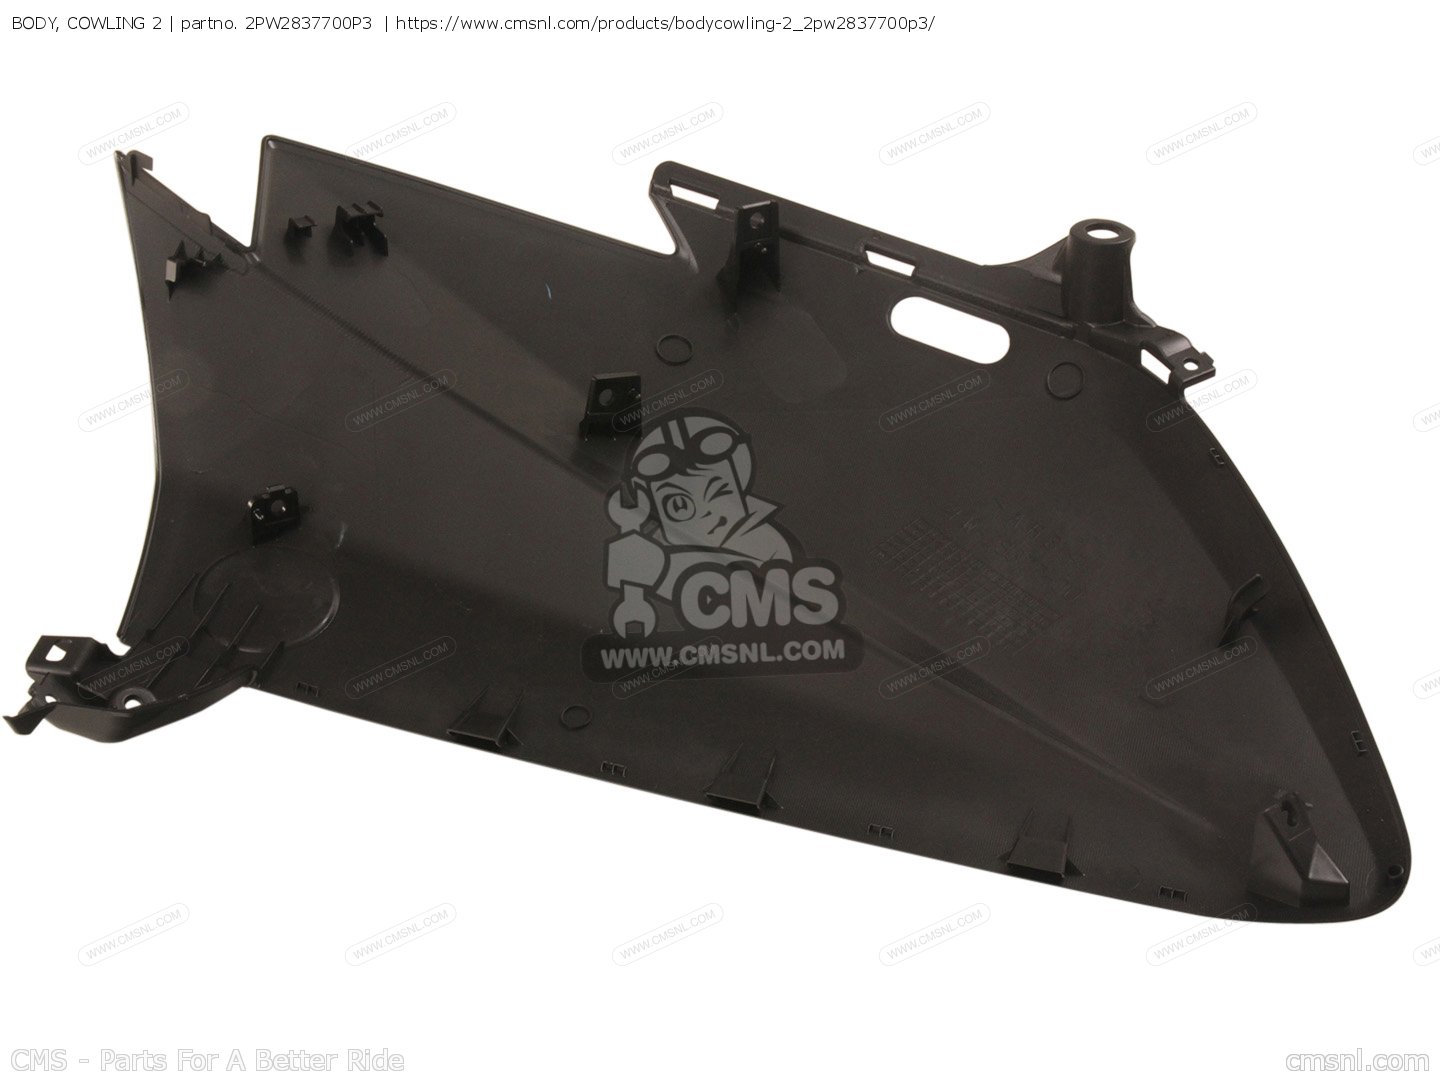 2PW2837700P3: Body, Cowling 2 Yamaha - buy the 2PW-28377-00-P3 at